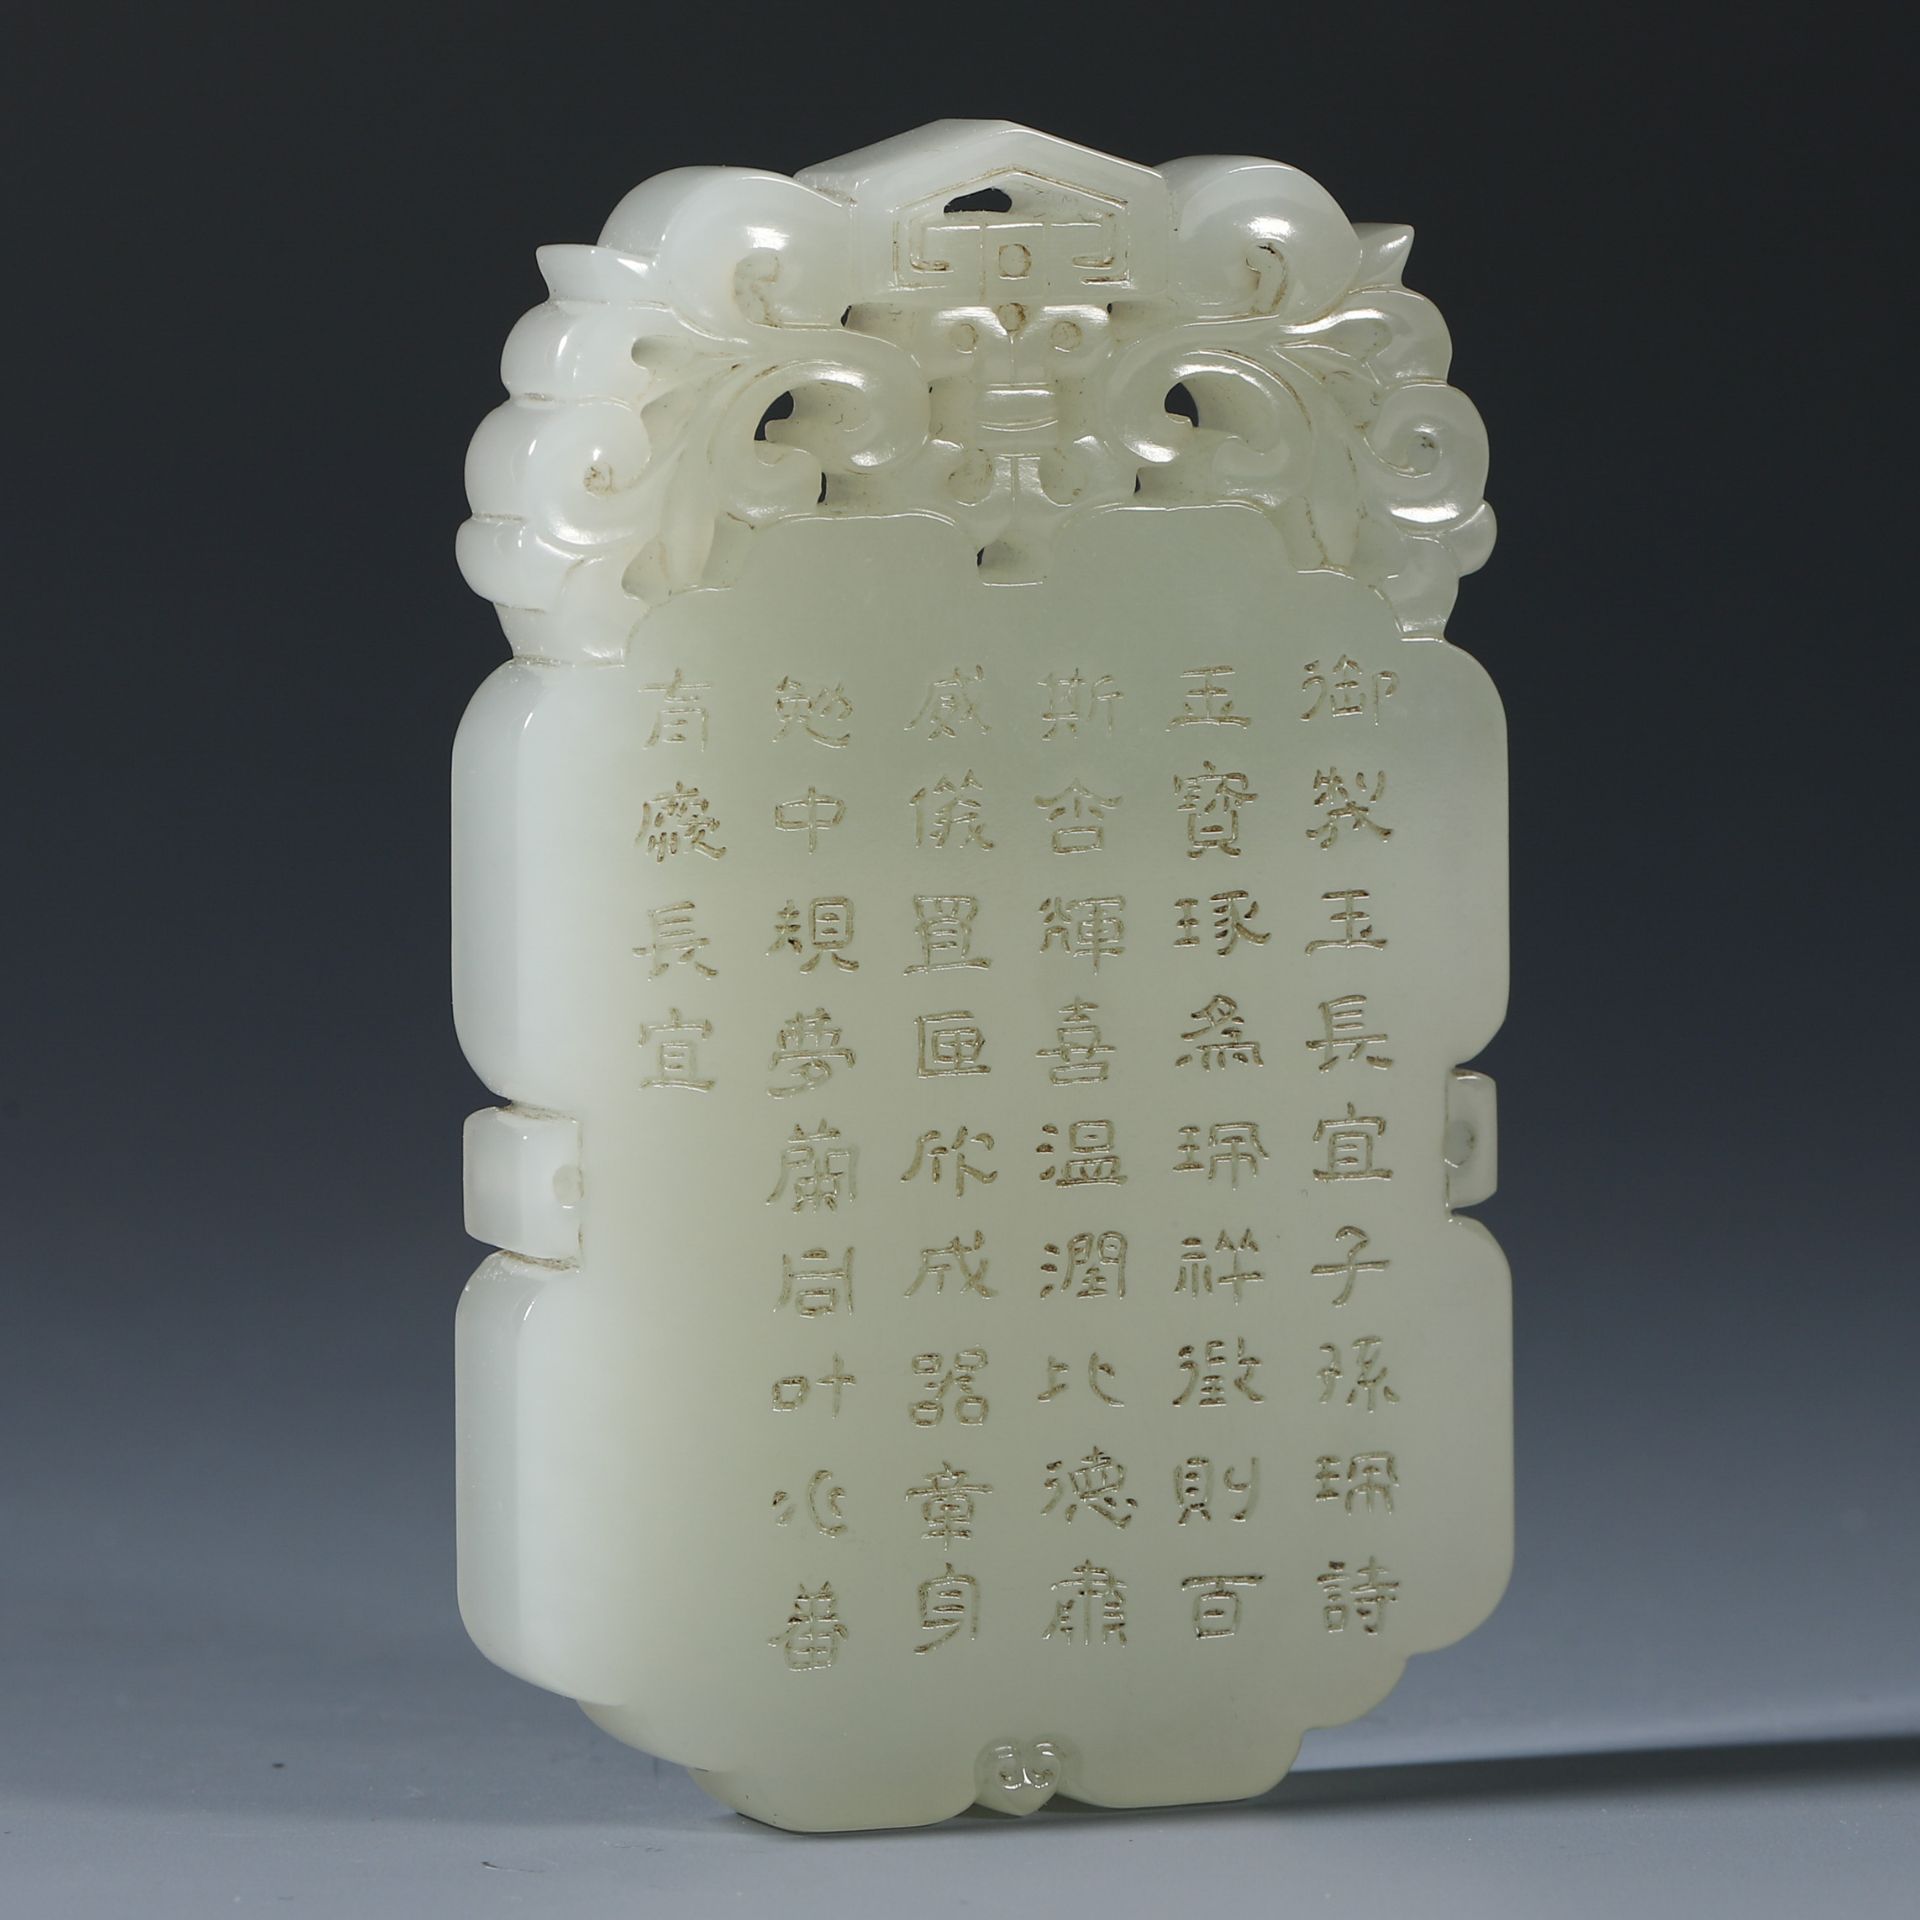 Hetian Jade pendant the appropriate long sons from  the Qing dynasty - Image 4 of 4